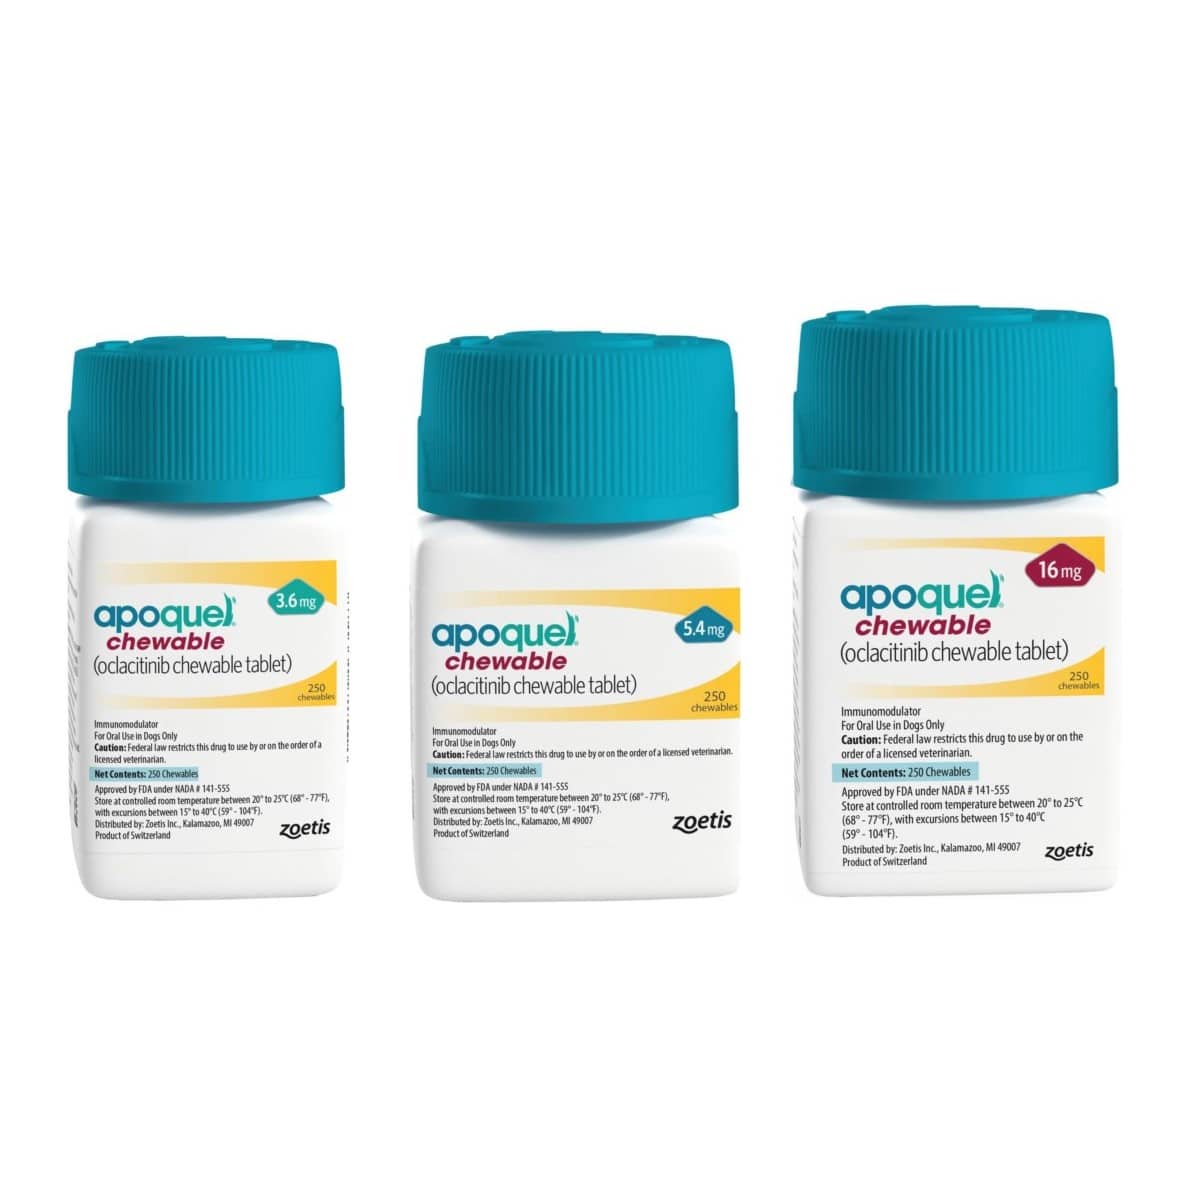 Apoquel (oclacitinib) Chewable Tablet for Dogs